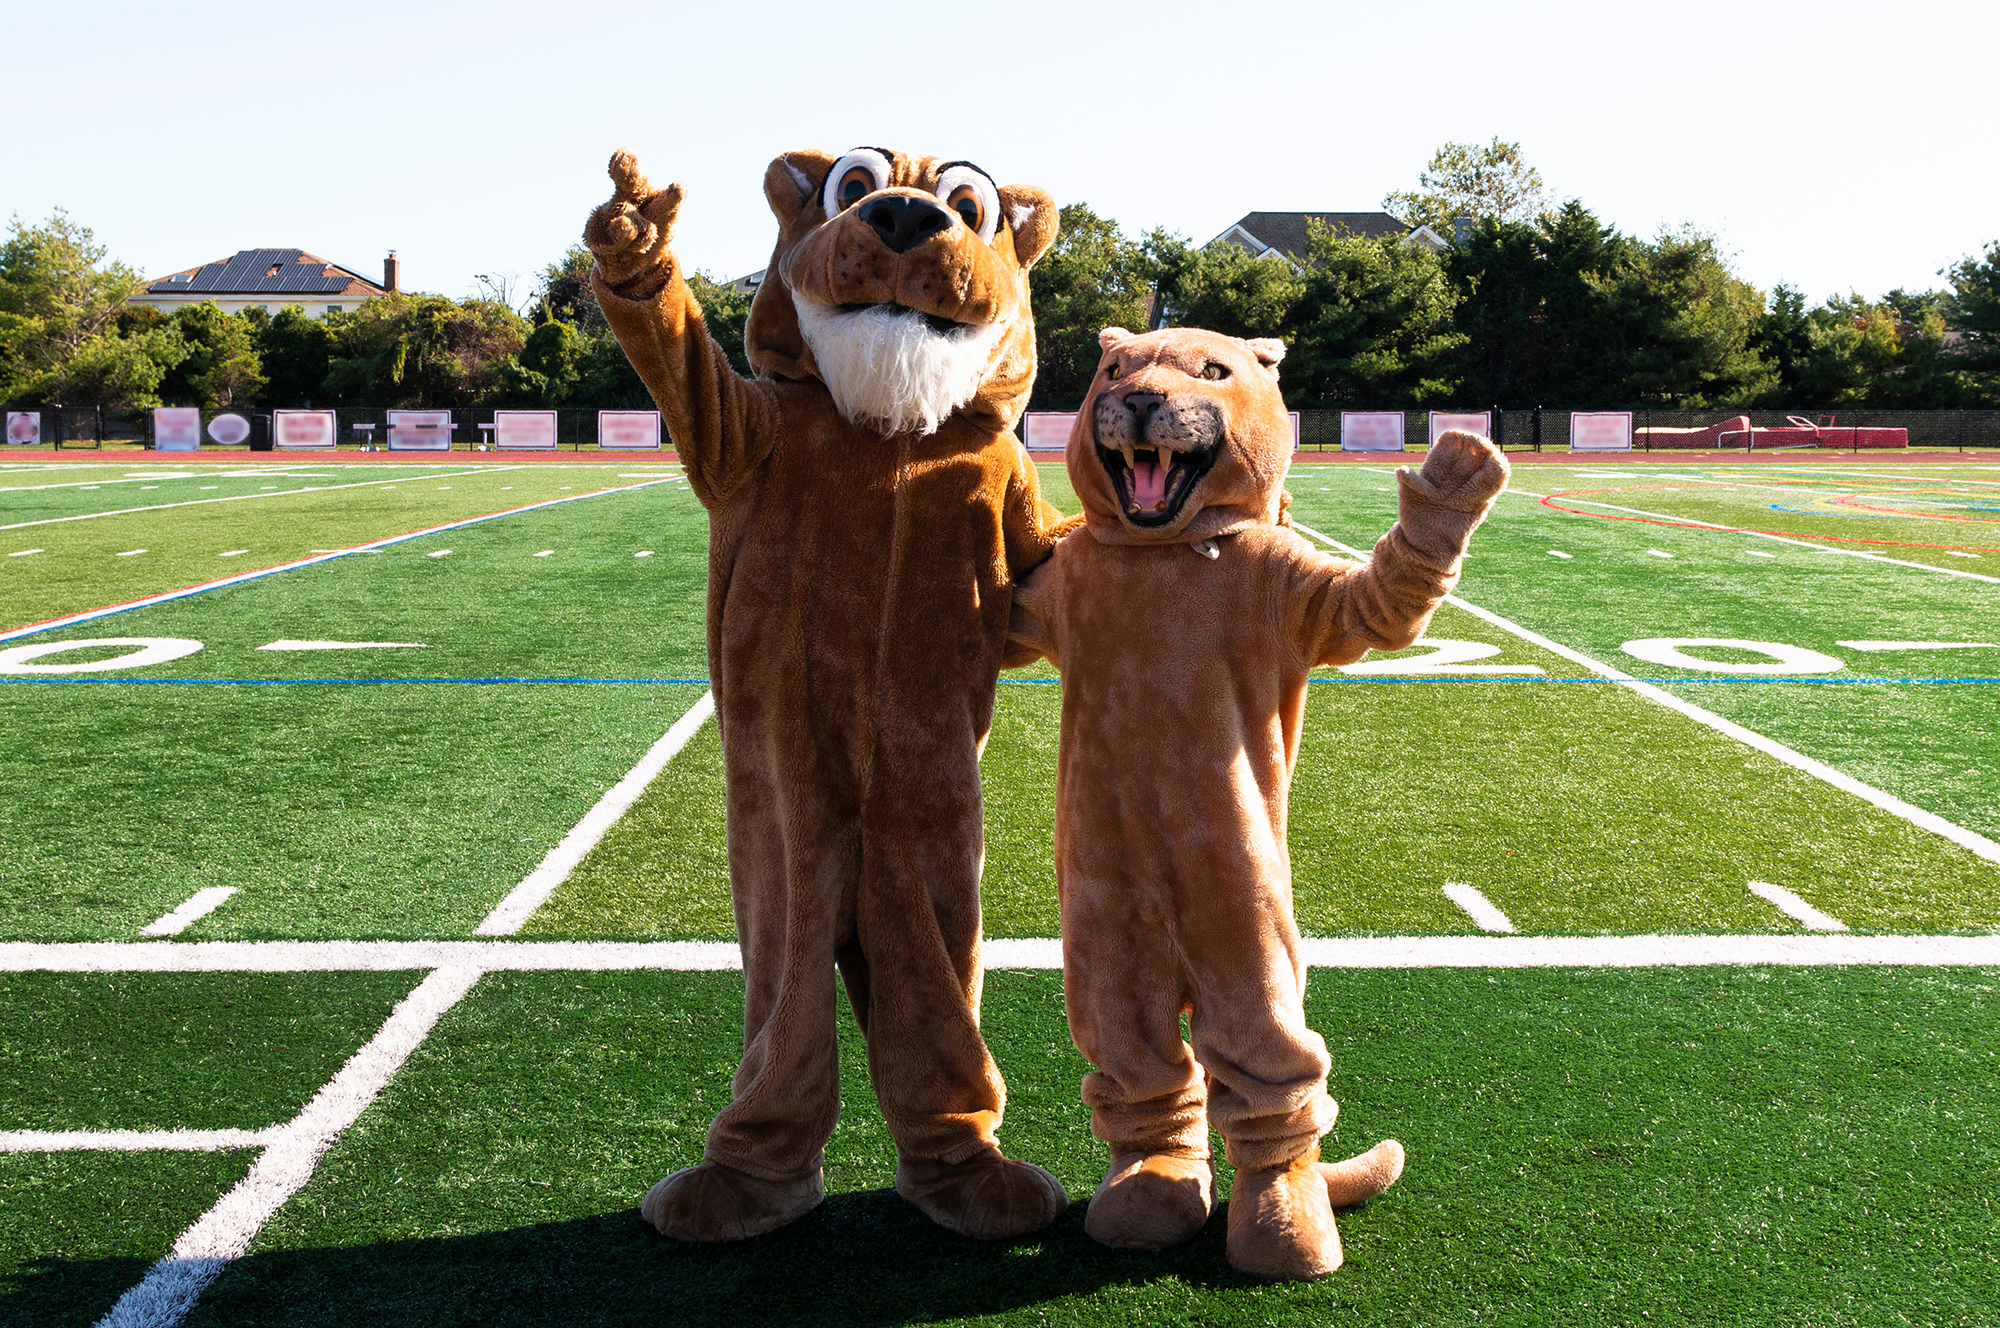 Two cougar mascots stand on a football field. They are waving at the camera